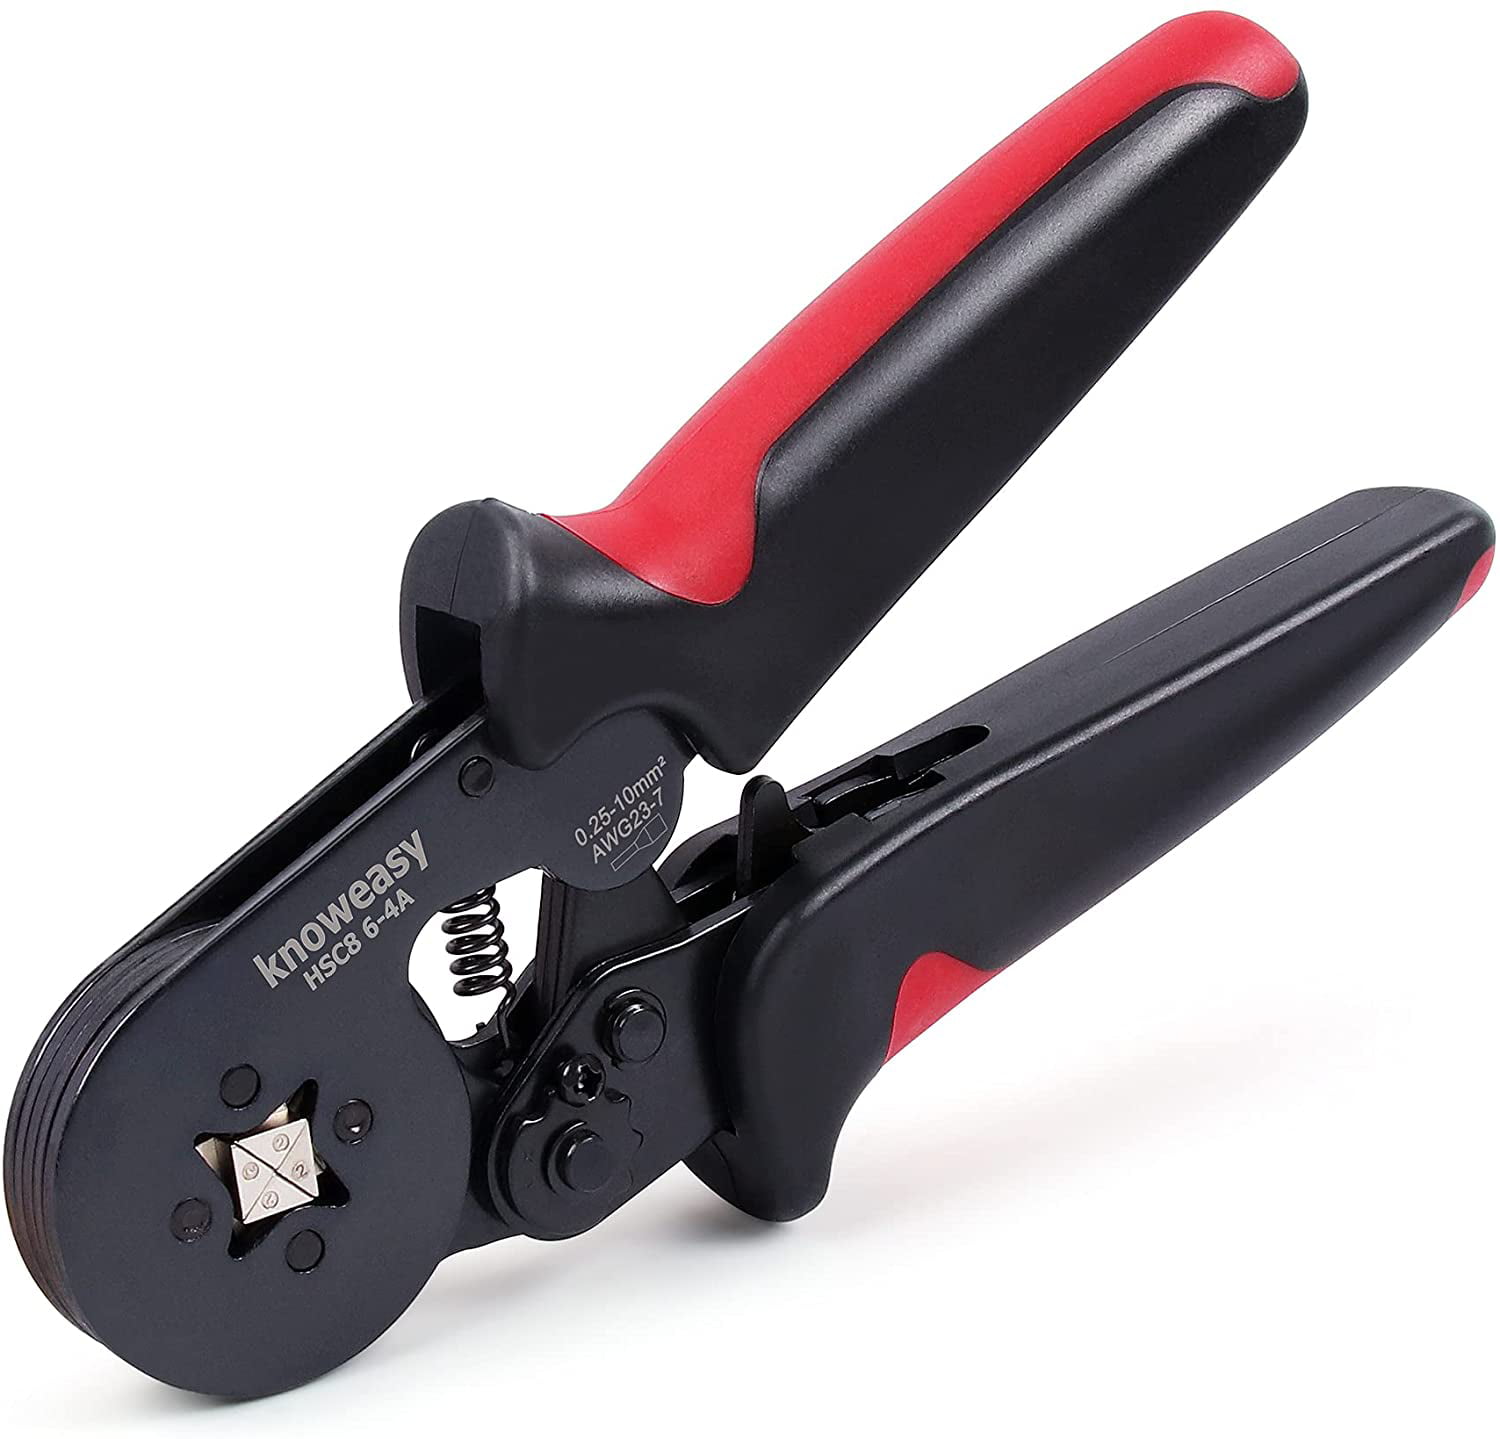 1 Self-adjusting Crimping Plier for Cable End Sleeve Multitools 